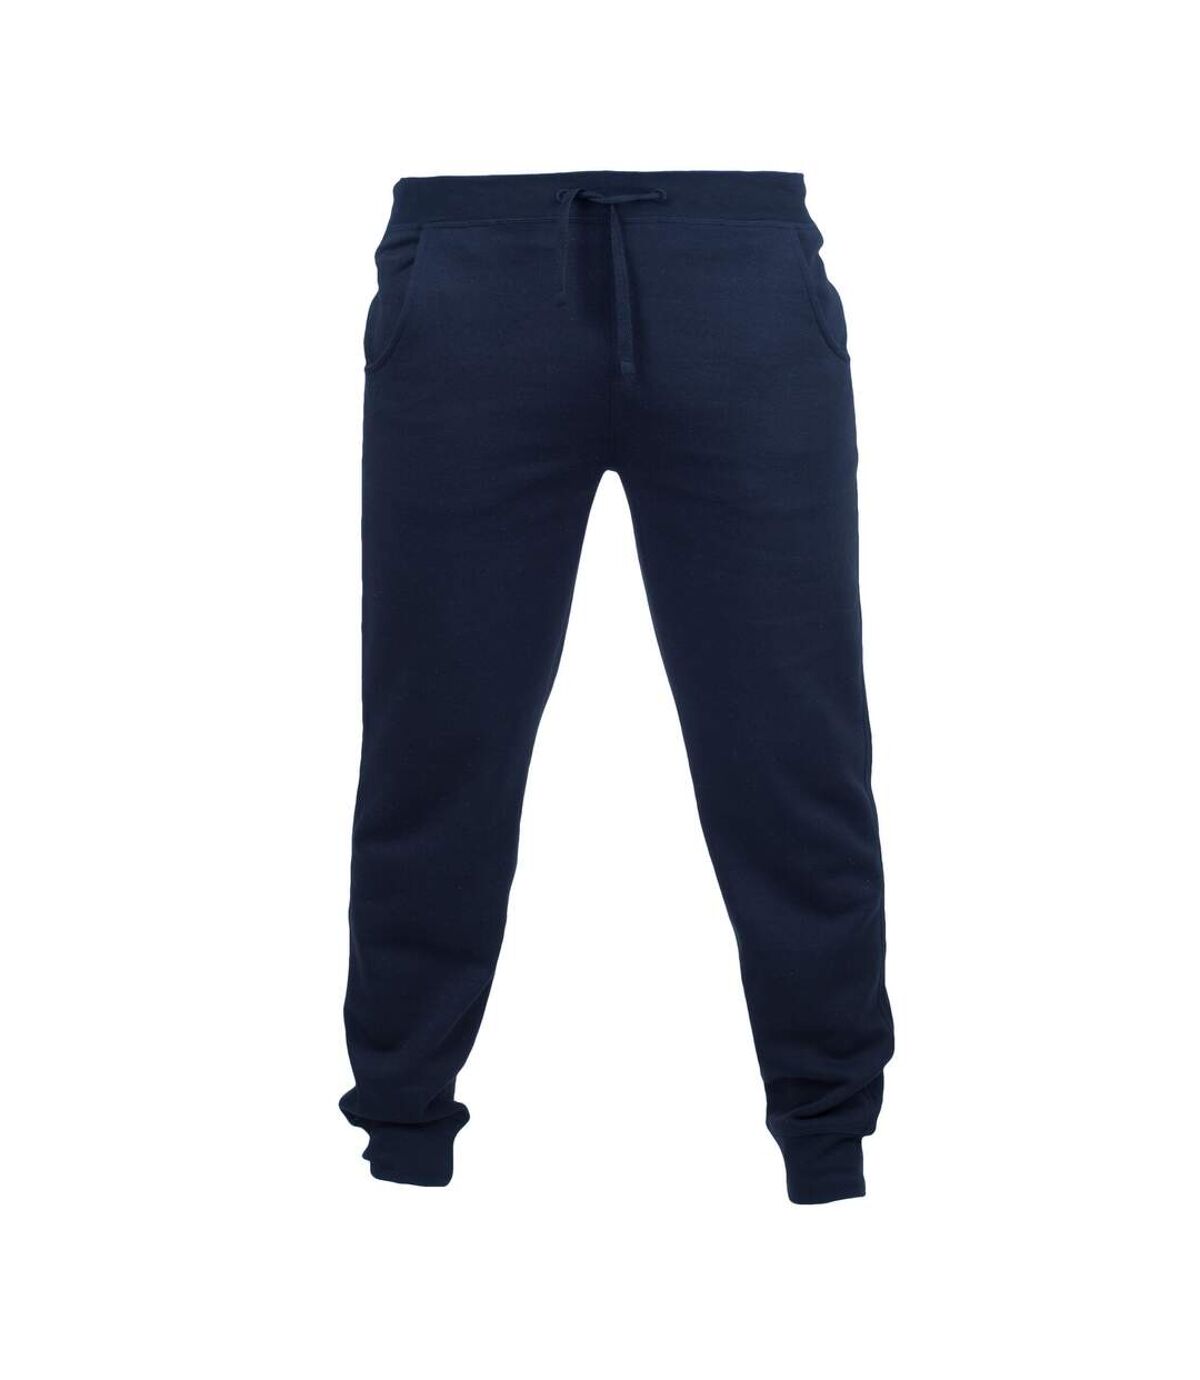 Skinnifit Mens Slim Cuffed Jogging Bottoms/Trousers (Navy)